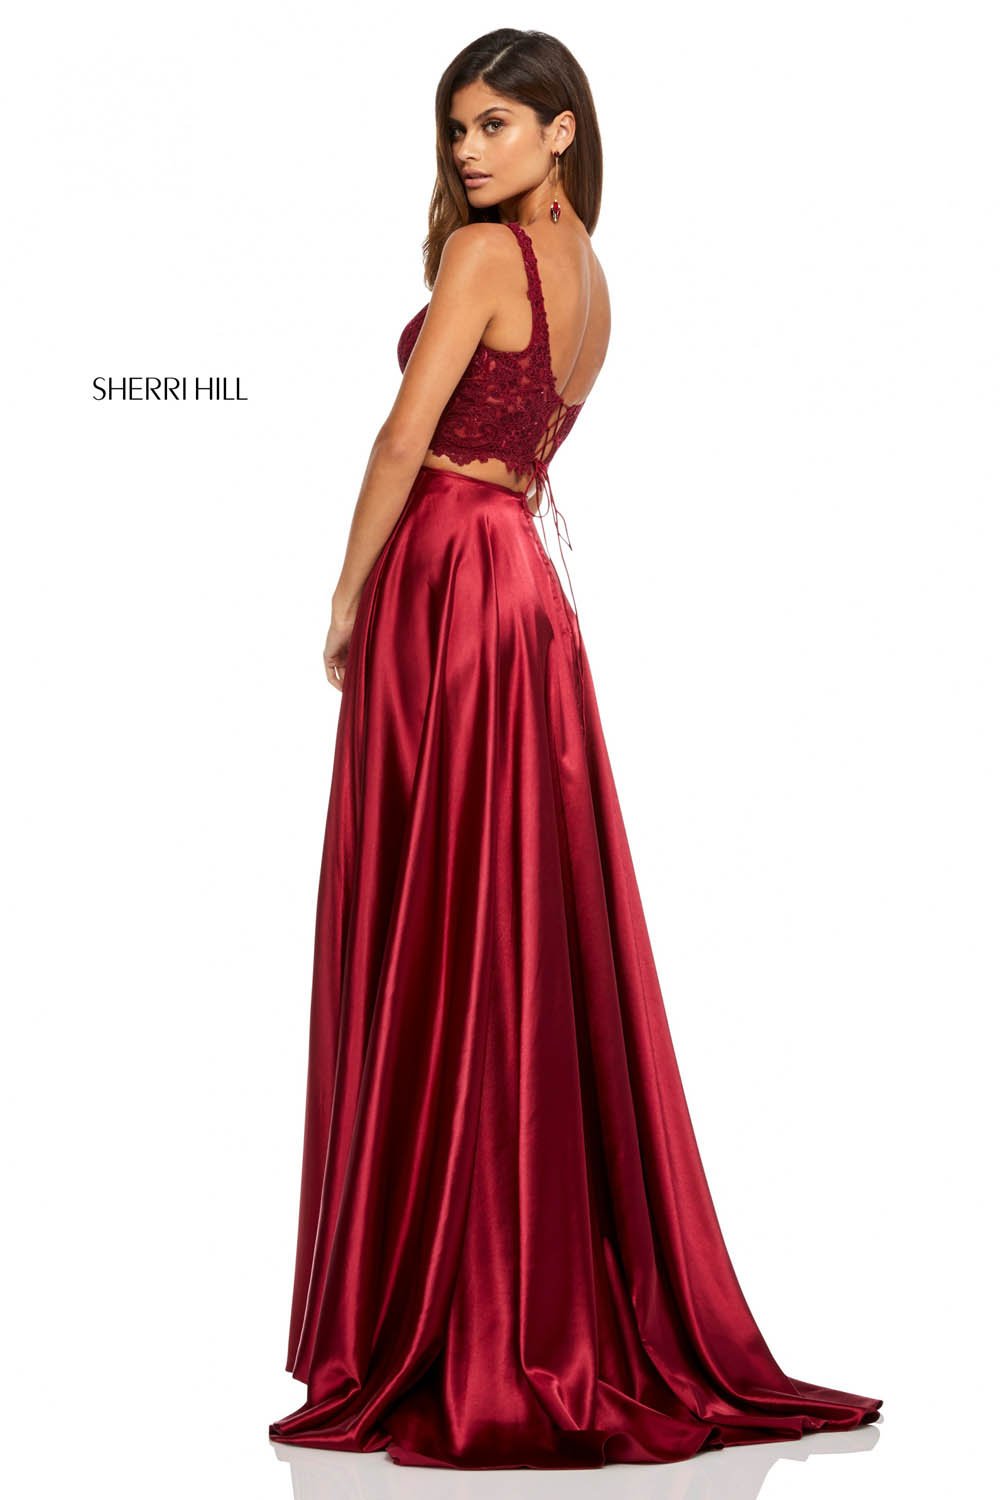 Sherri Hill 52600 dress images in these colors: Yellow, Wine, Teal, Mocha, Rose, Red, Peacock, Orange, Black.